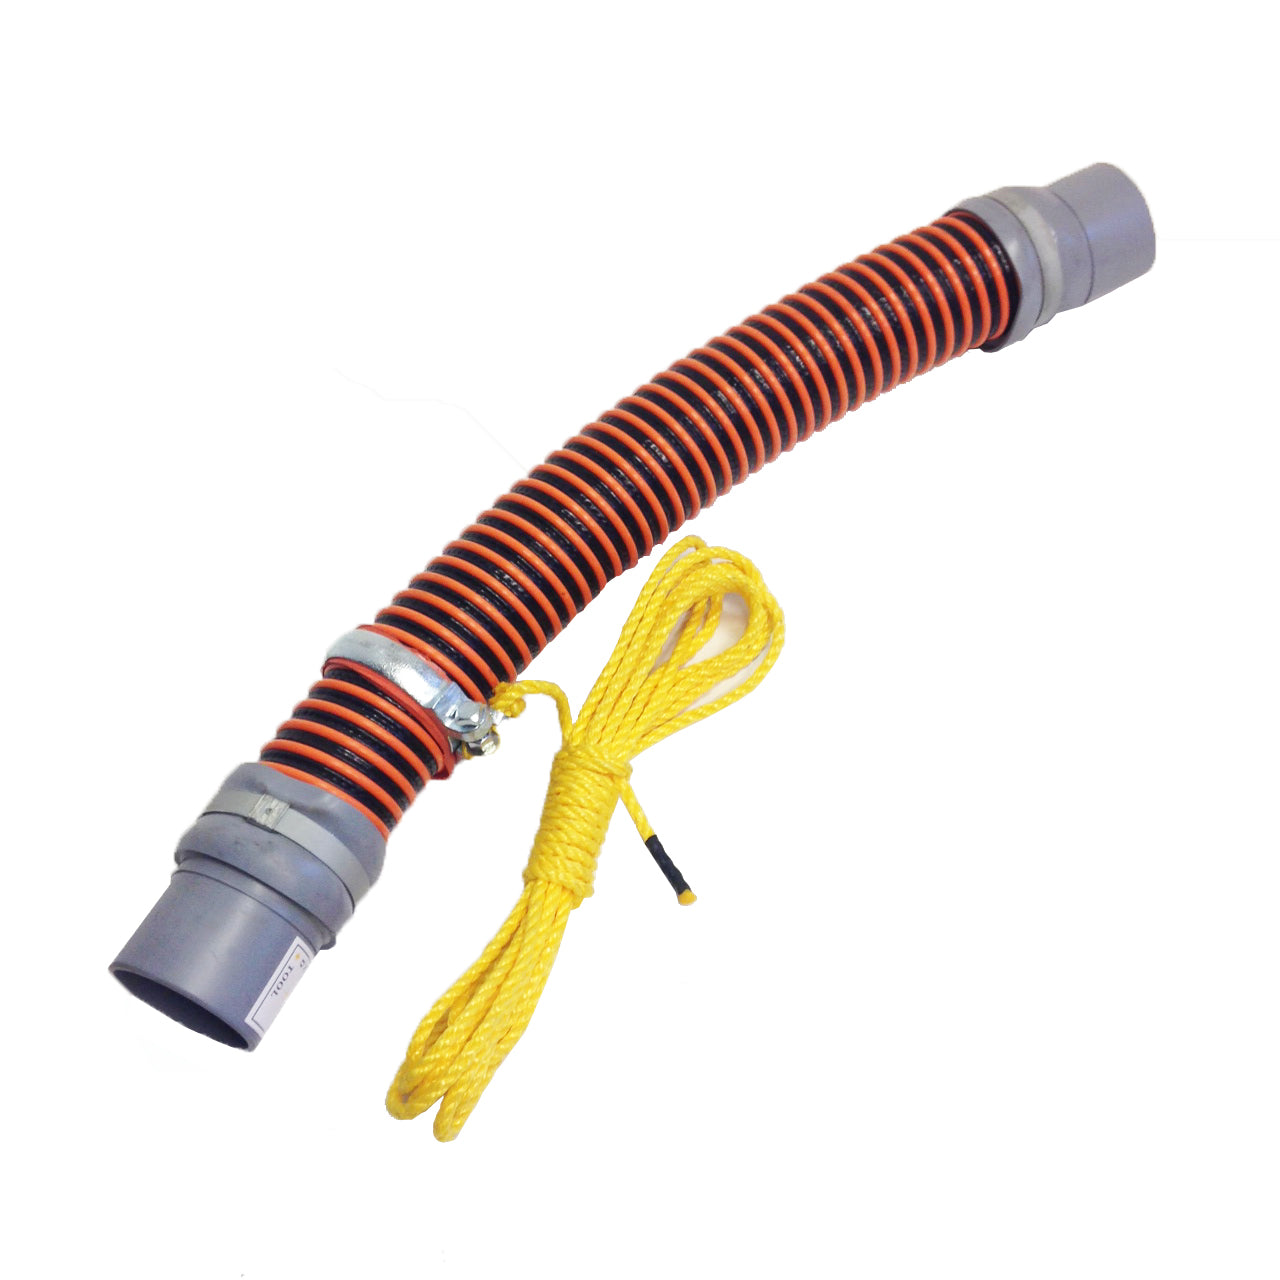 Super Heavy Duty "Tiger Tail Hose Guide